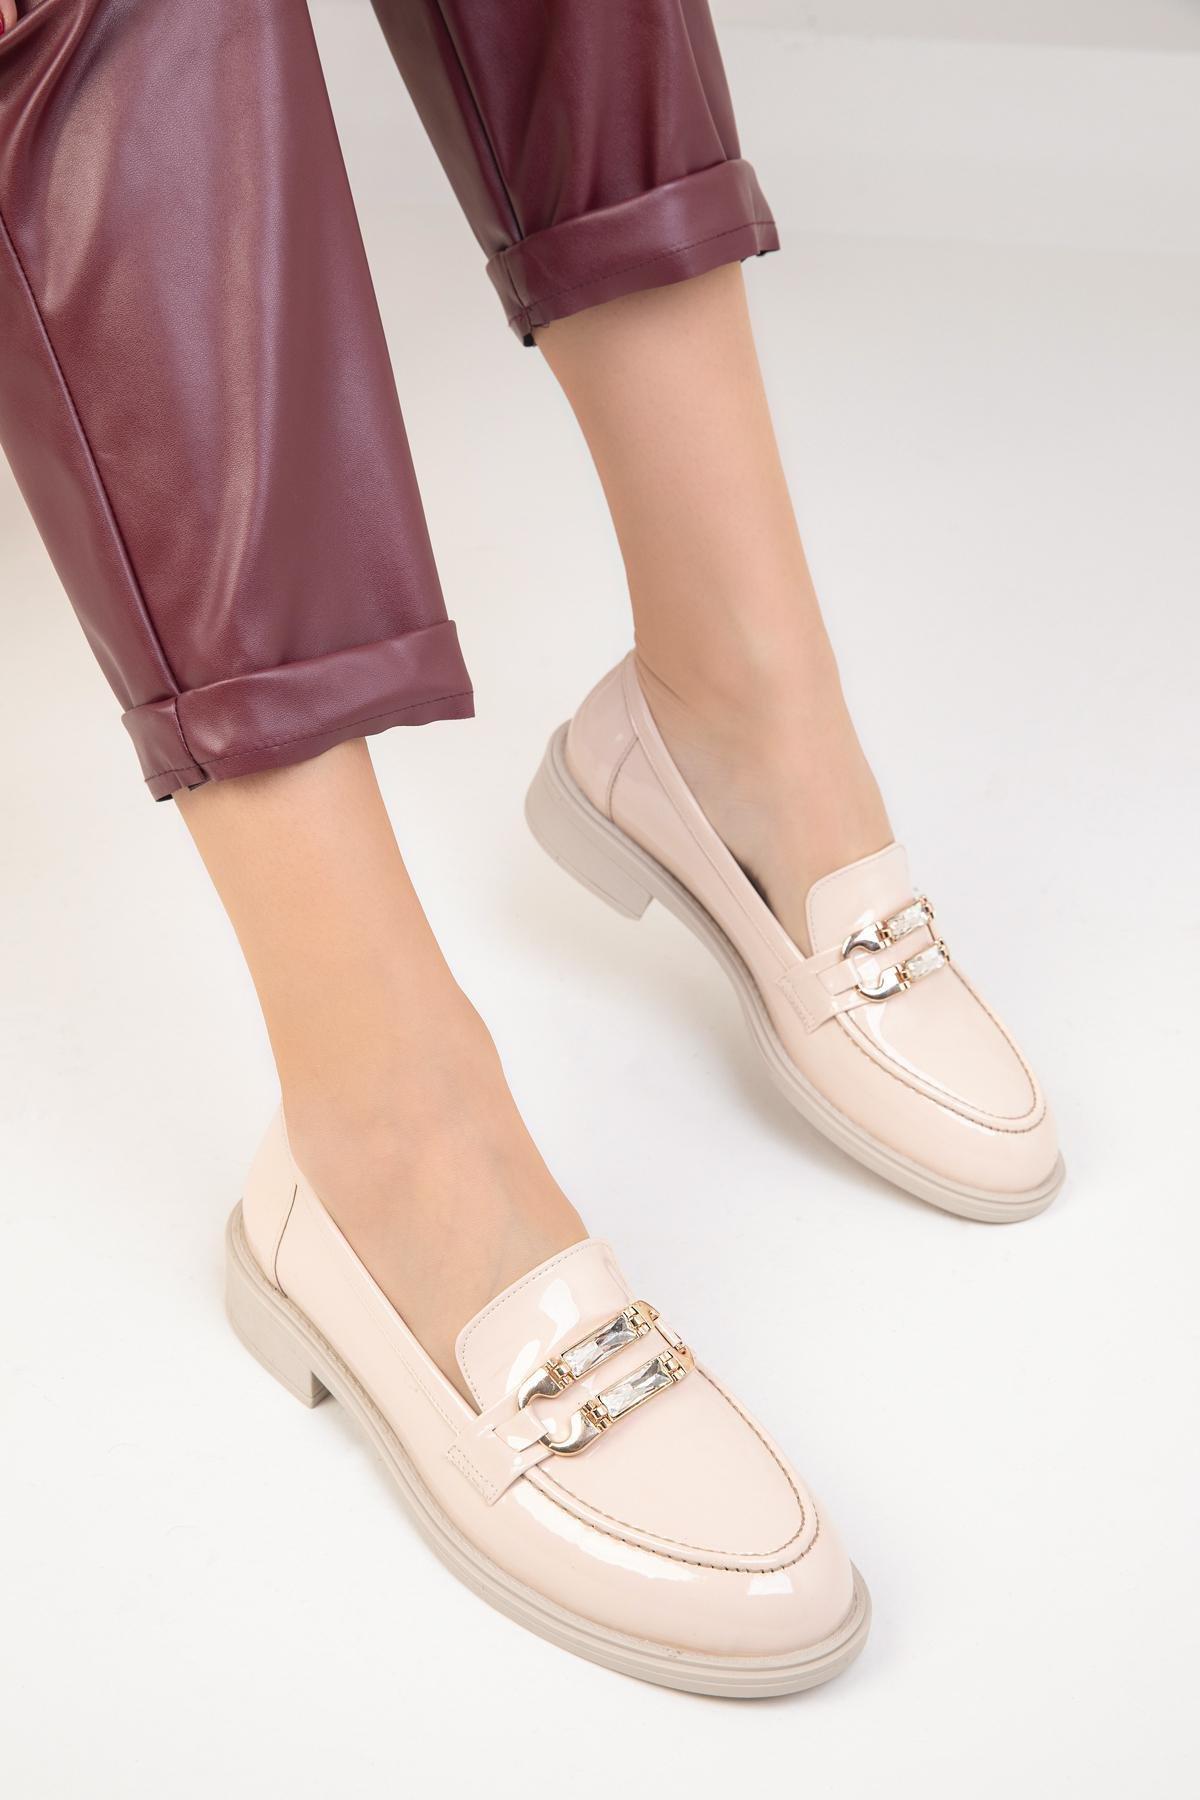 SOHO - Beige Patent Leather Womens Casual Shoes 18733